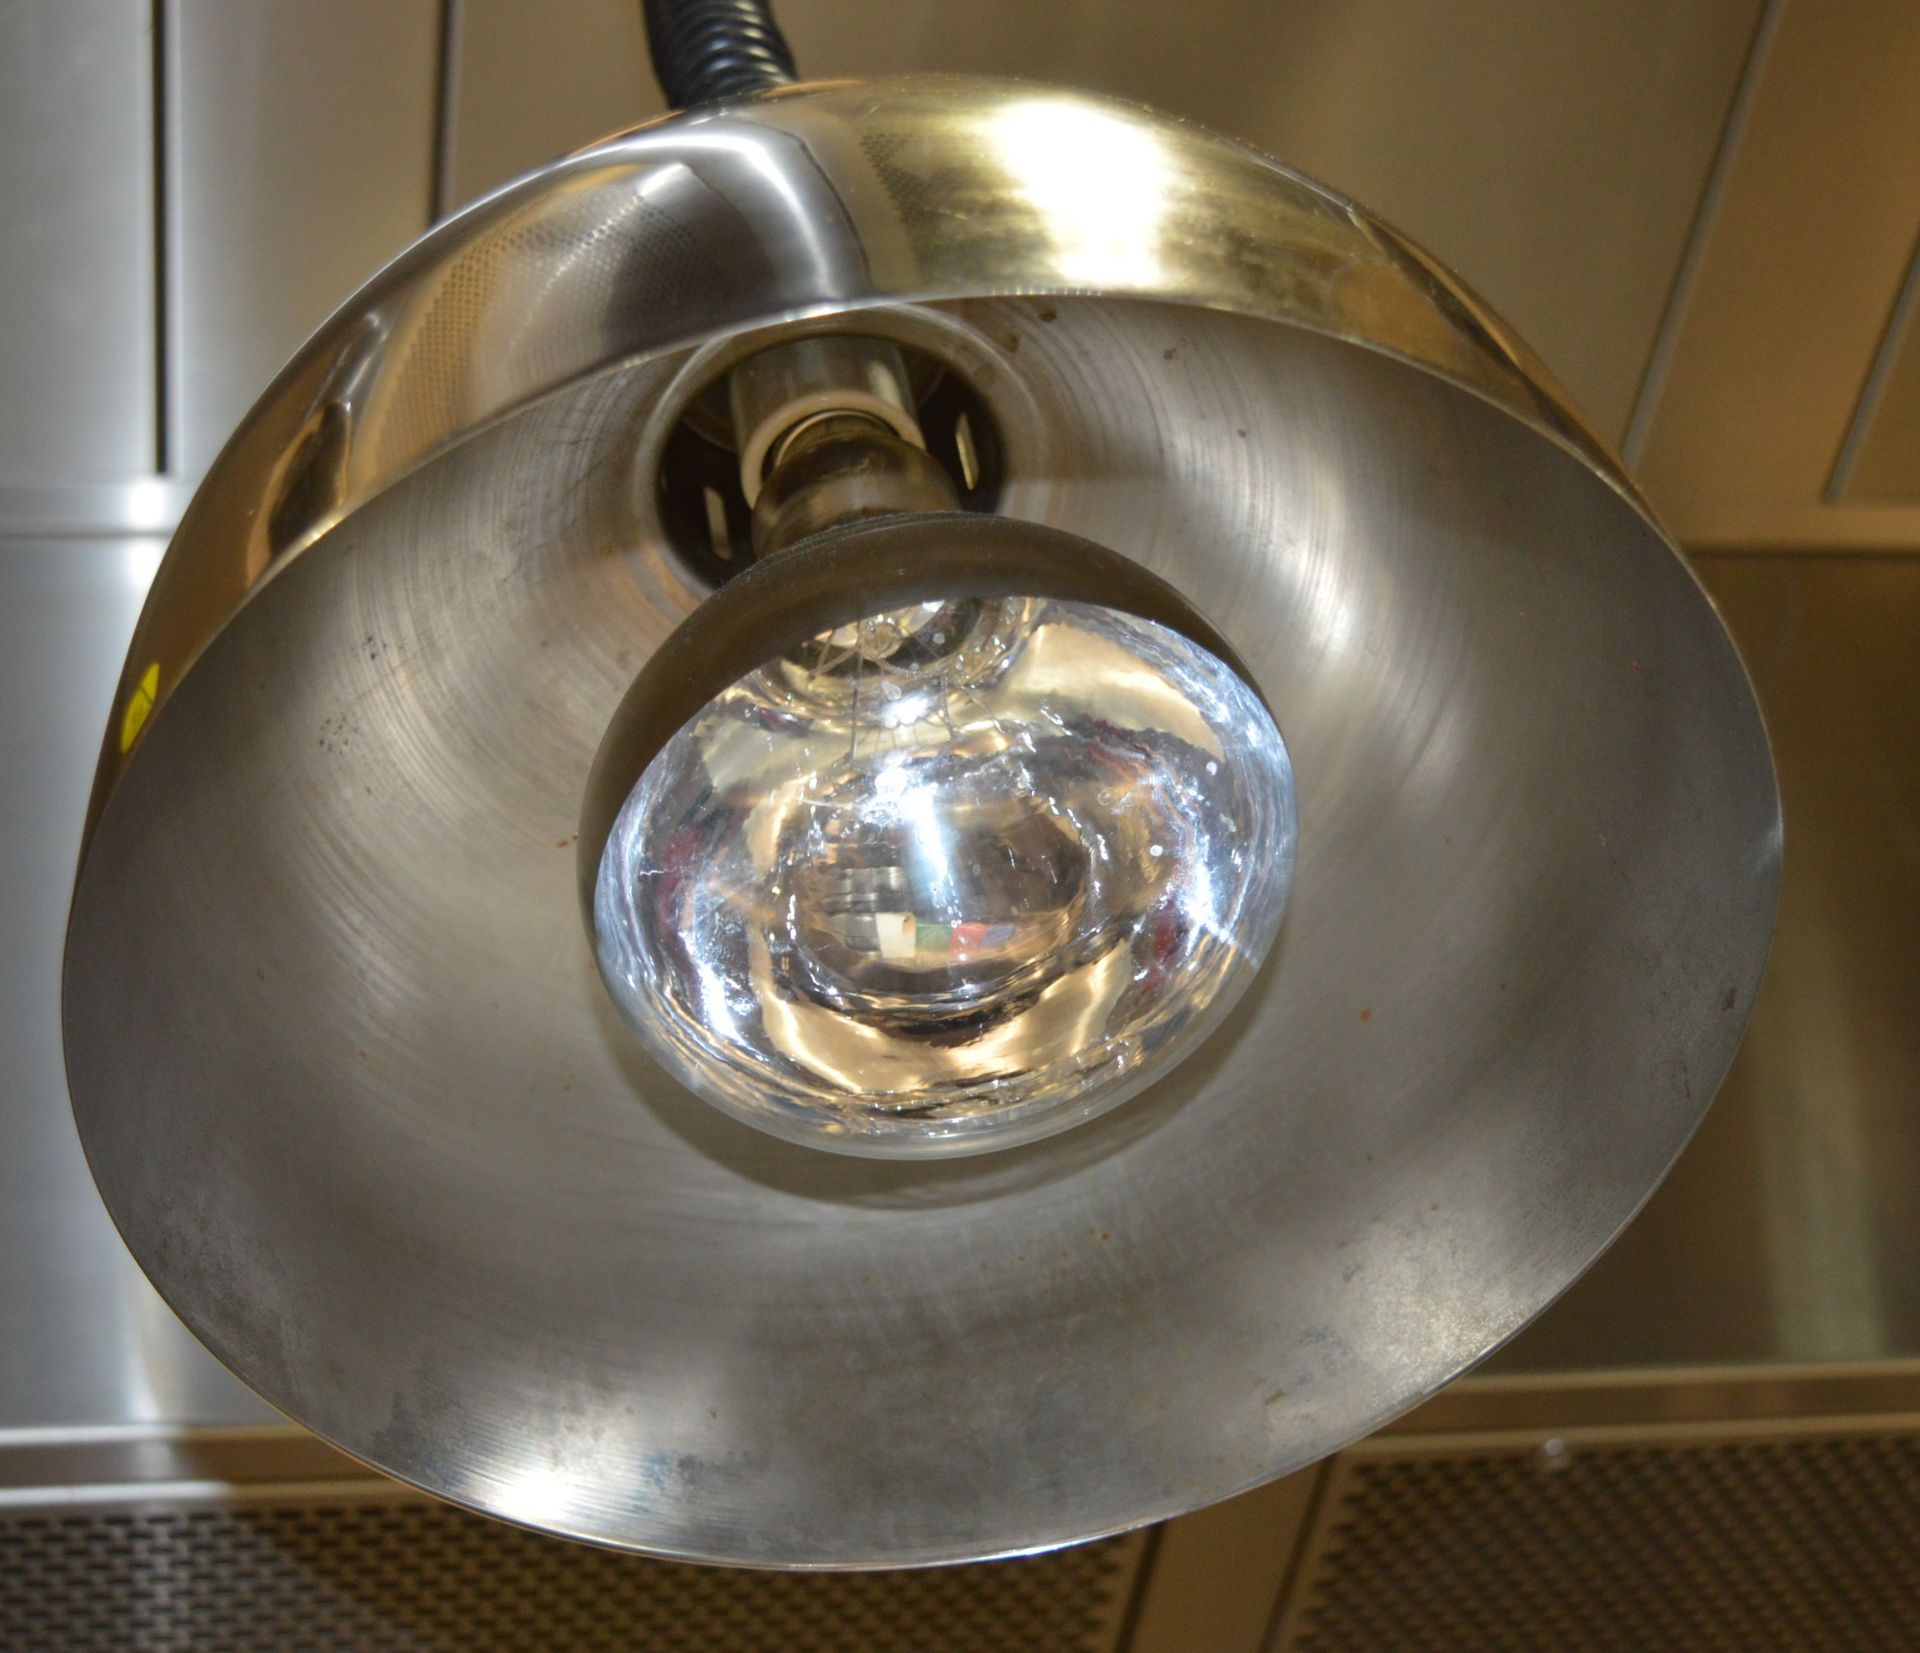 4 x Hatco DL-750-RL Hanging Retractable Heat Lamps in Bright Chrome - Keeps Food Warm at Kitchen - Image 6 of 7